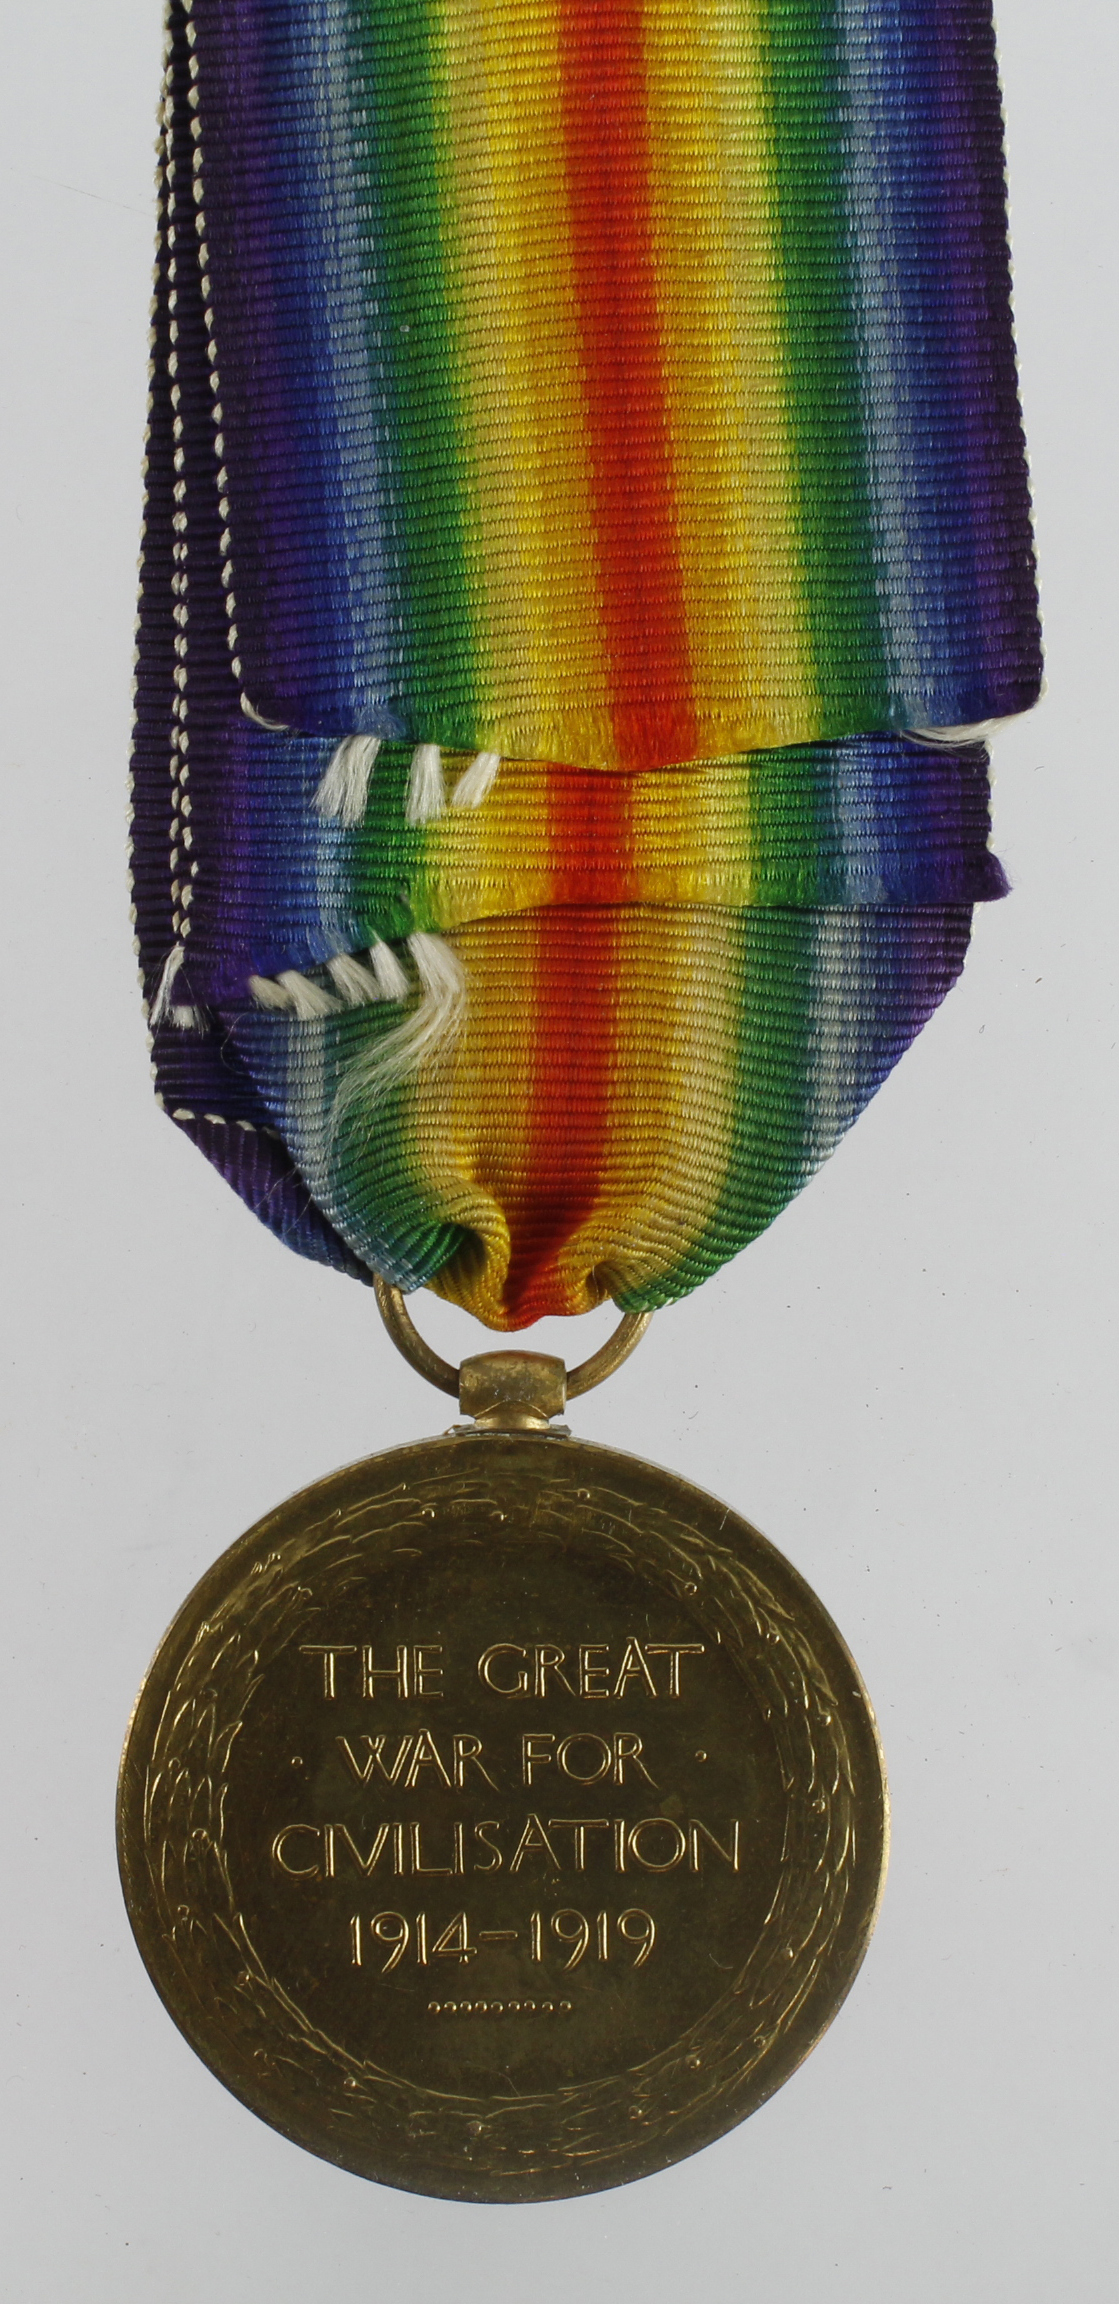 WW1 casualty Victory medal to 2/Lieut Sidney Shepard 3rd /10th bn London Reg. K in A 28-4-1917, - Image 2 of 2